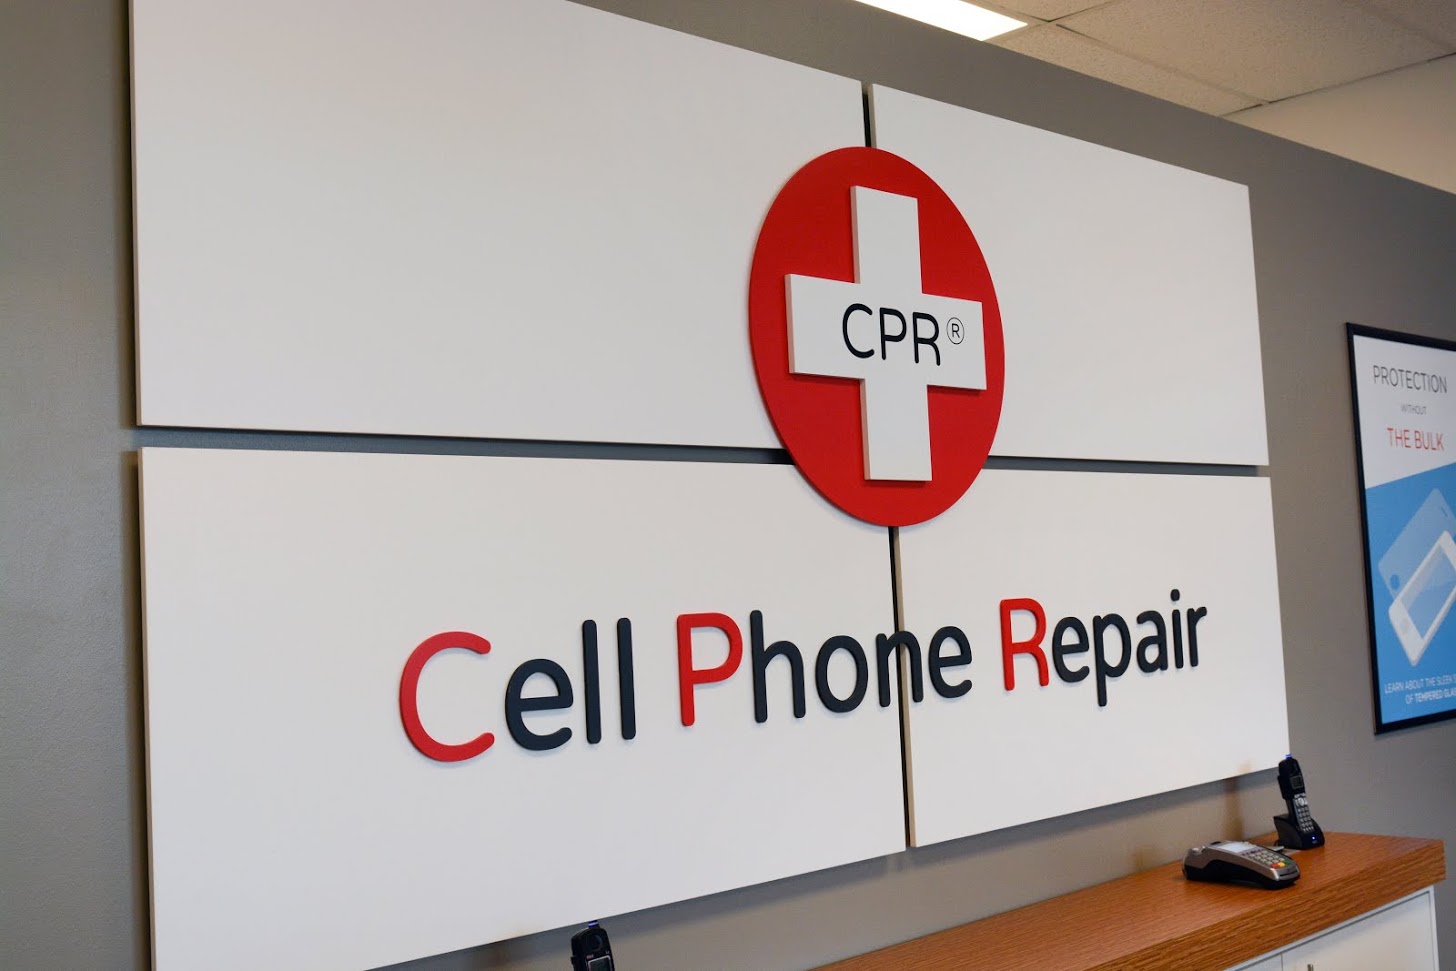 CPR Cell Phone Repair, Friday, January 11, 2019, Press release picture